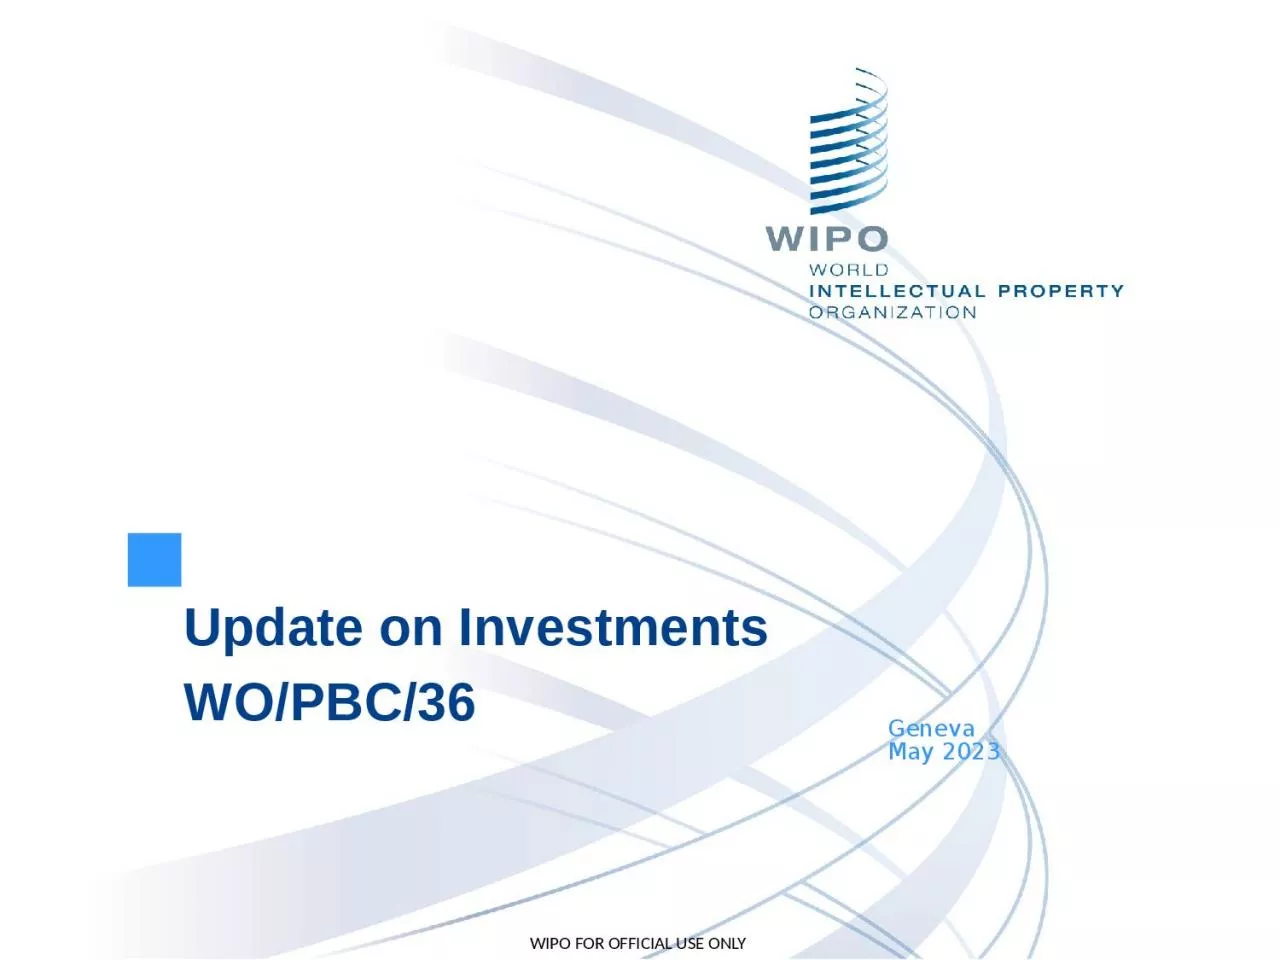 Update on Investments WO/PBC/36